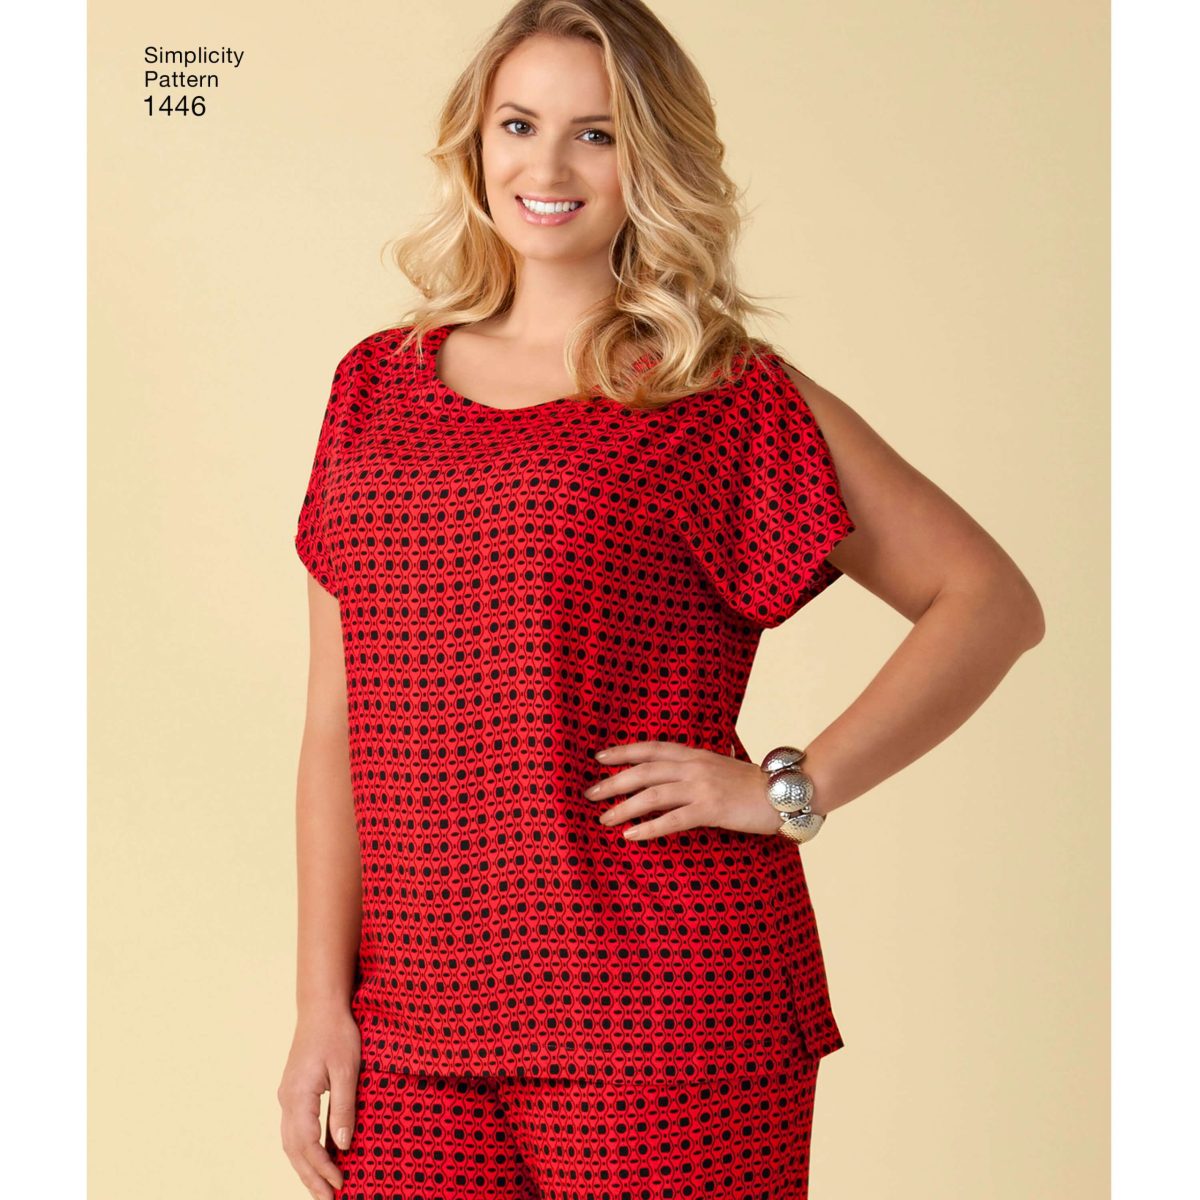 Simplicity Sewing Pattern 1446 Six Made Easy Pull on Tops and Trousers or Shorts for Plus Size